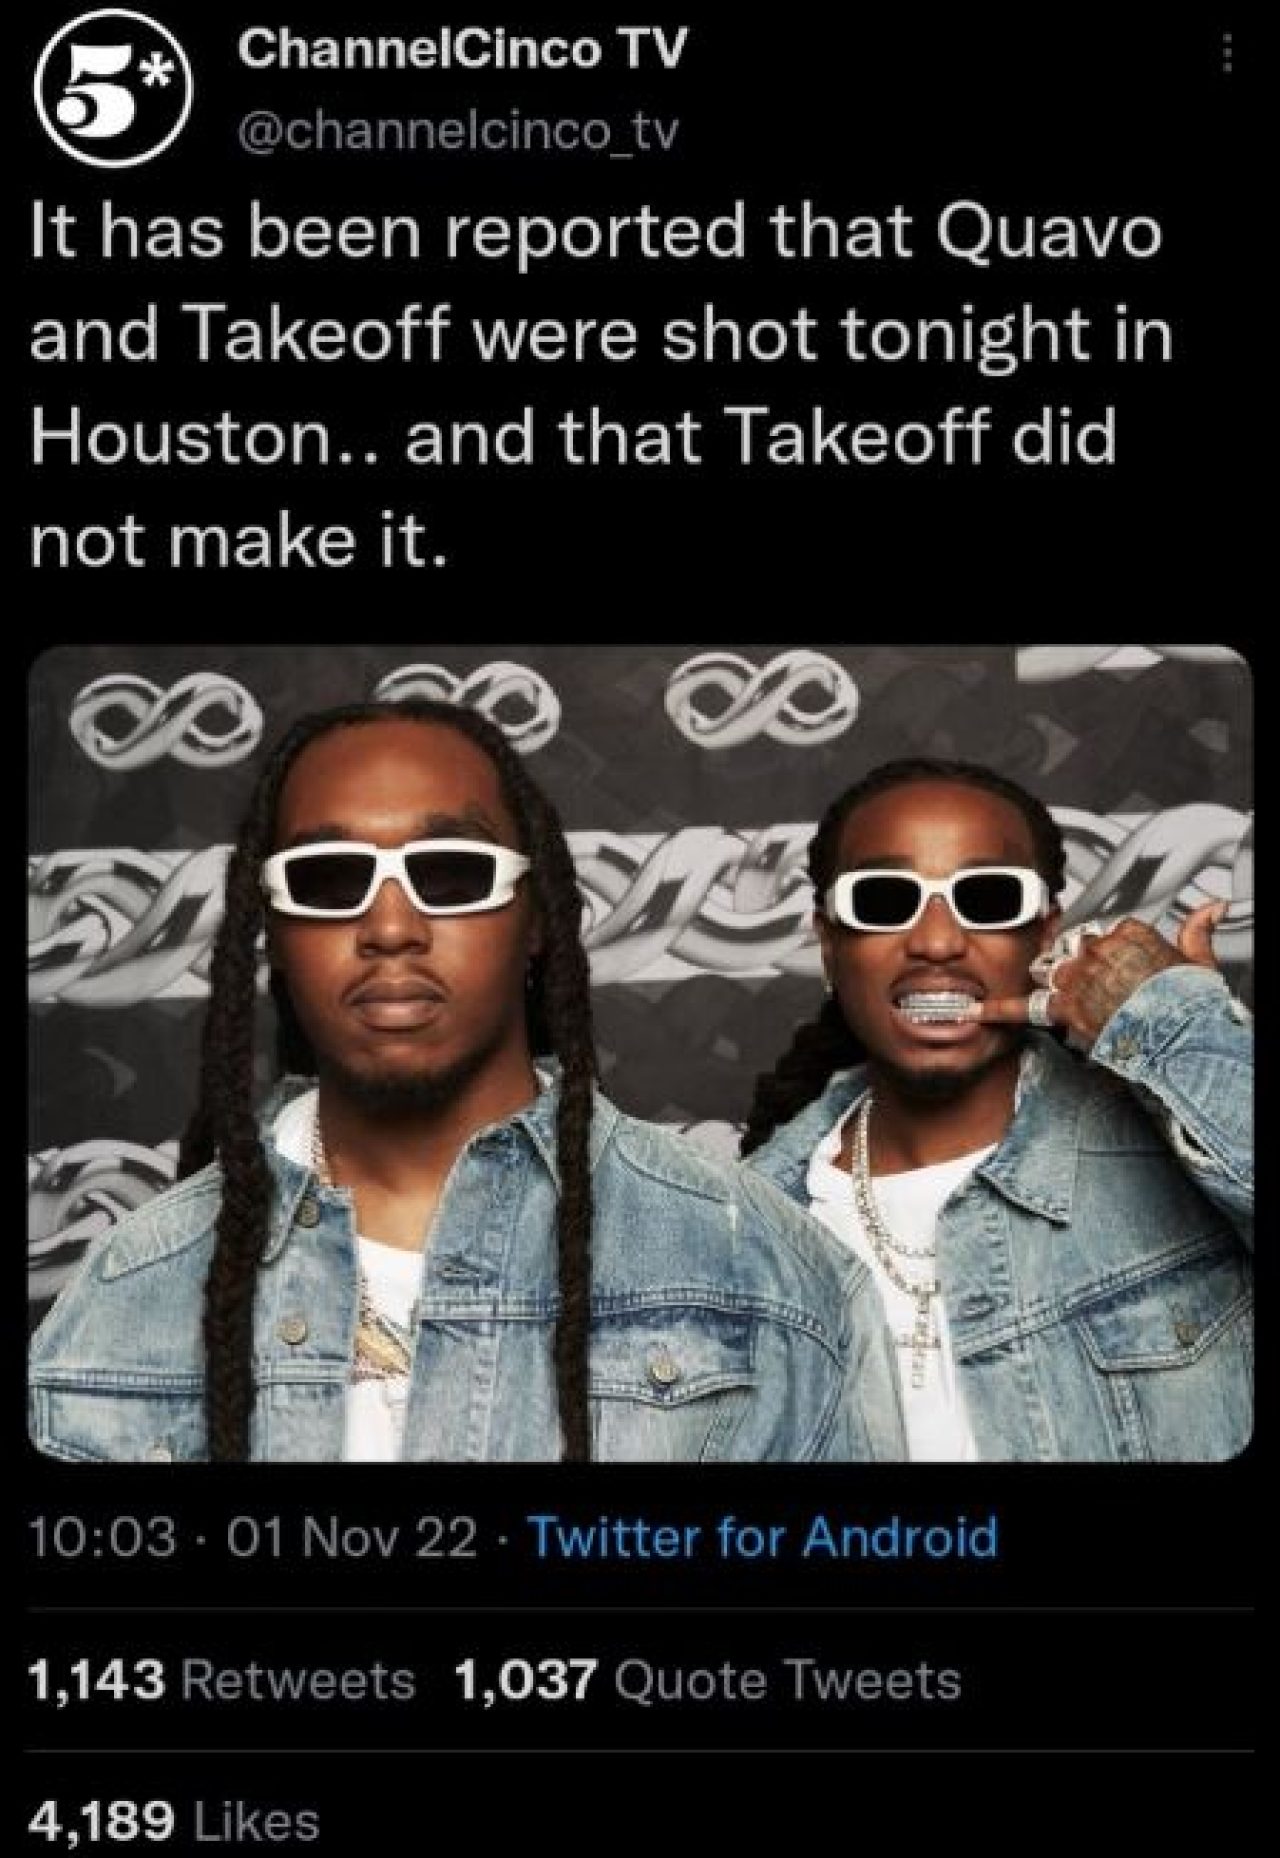 One of the Migos Rapper, Takeoff, shot dead. Afro News Wire